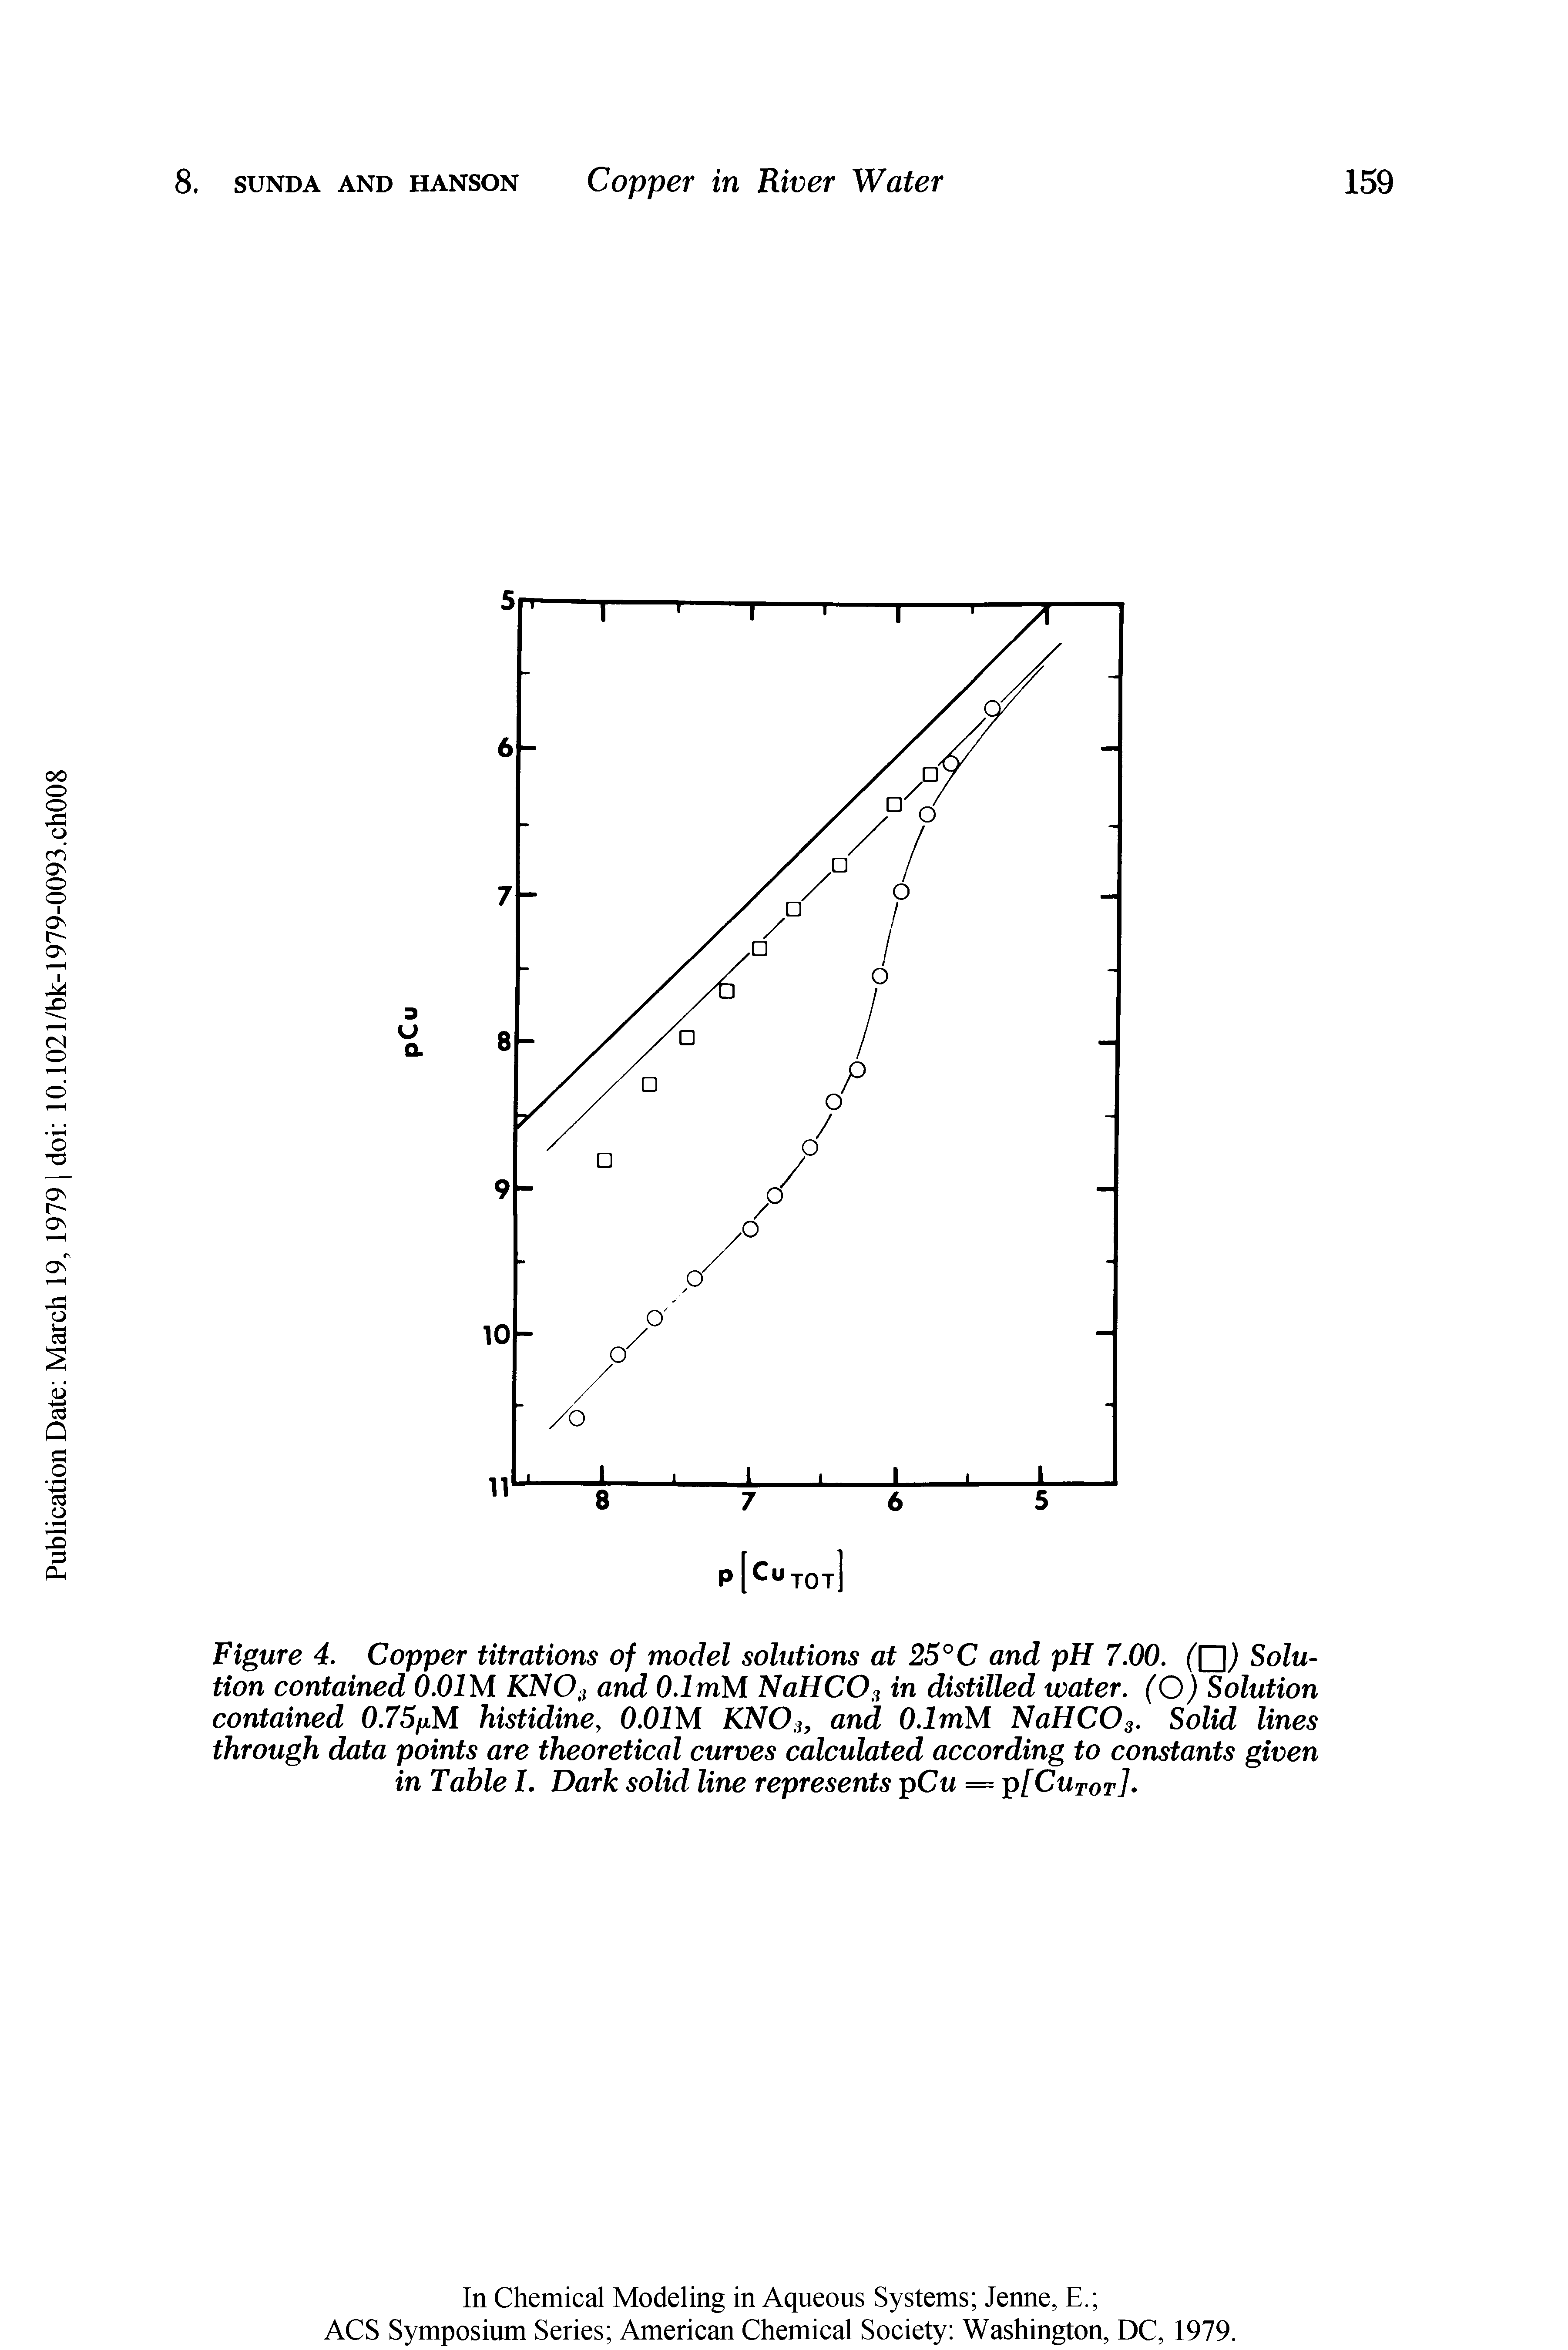 Figure 4. Copper titrations of model solutions at 25°C and pH 7.00. Solution contained O.OIM KNO and O.lmM NaHCO in distilled water. (o) Solution contained 0.75fxM histidine, O.OIM KNO3, and O.lmM NaHCOs. Solid lines through data points are theoretical curves calculated according to constants given in Table 1. Dark solid line represents pCw = p[Cutot] ...